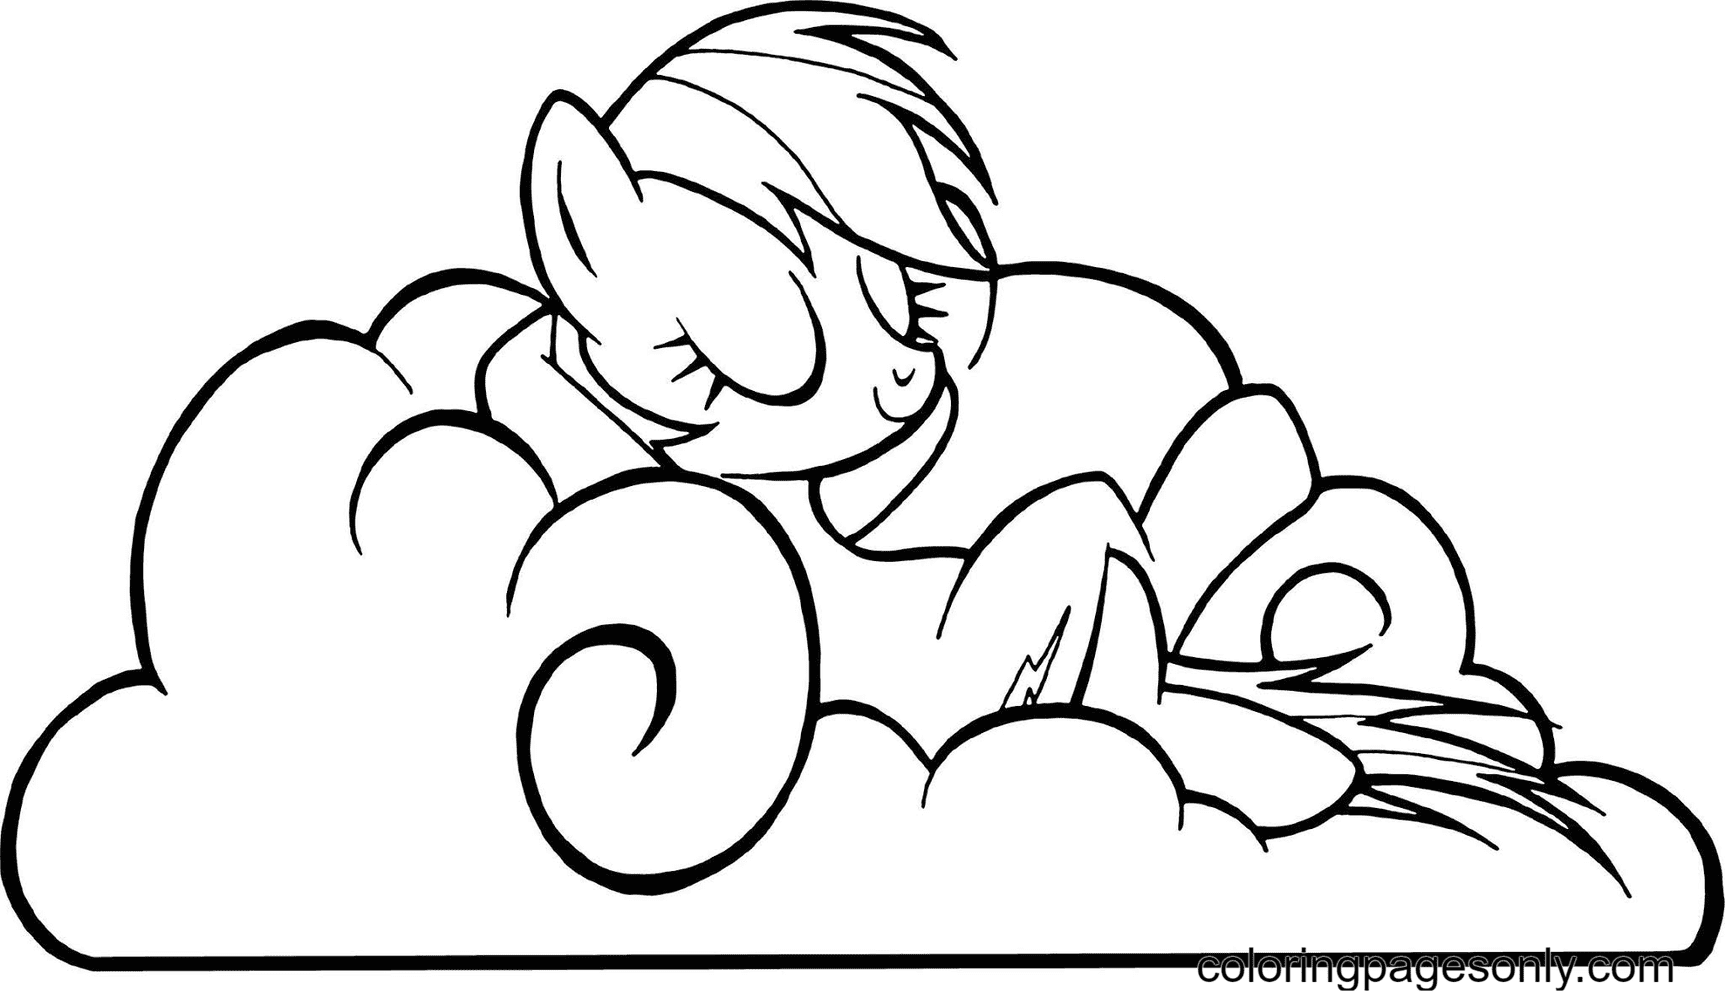 Pony Rainbow Dash Sleeping Coloring Pages   My Little Pony ...